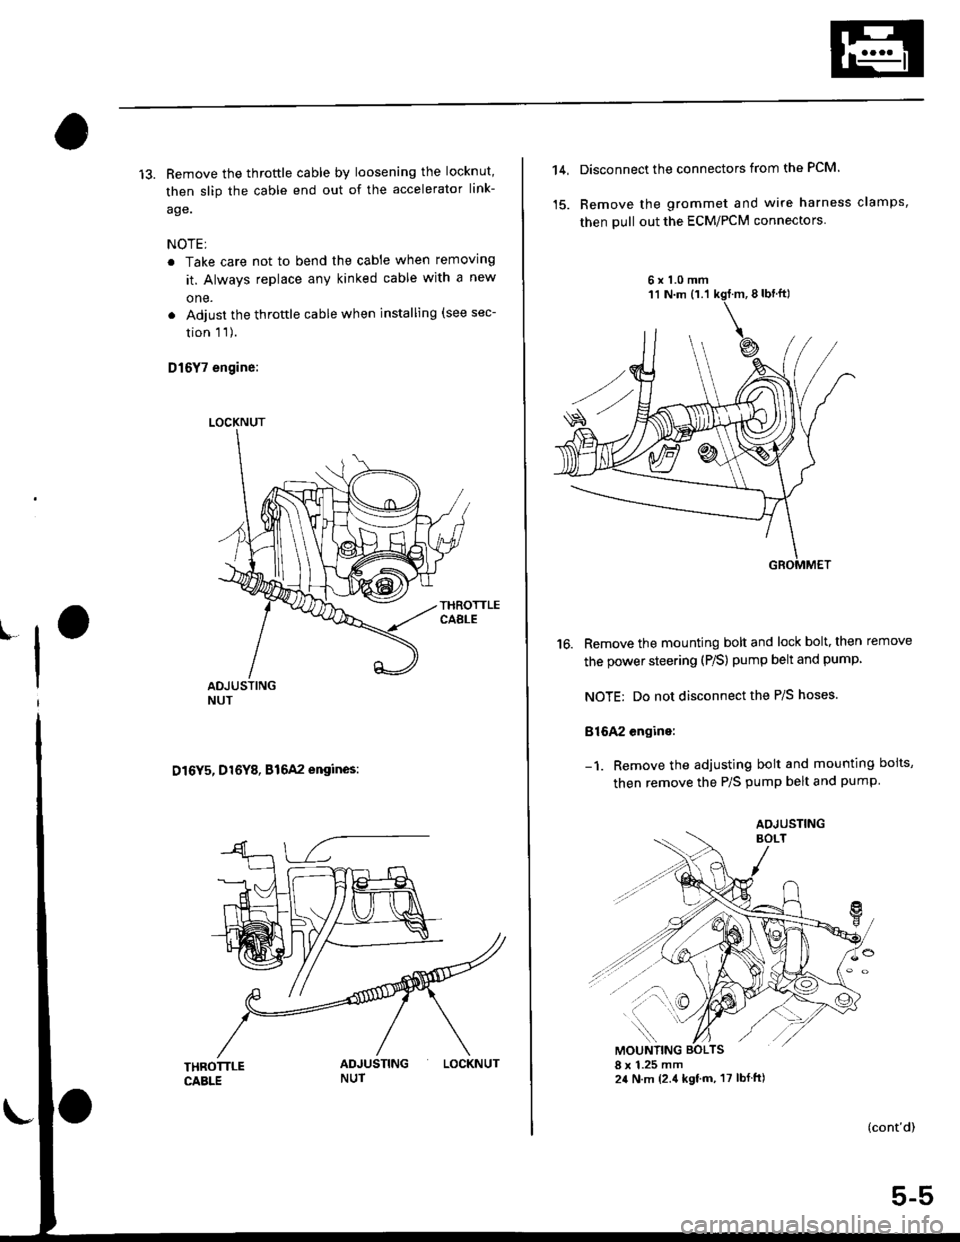 HONDA CIVIC 1996 6.G Workshop Manual 13. Remove the throftle cable by loosening the locknut,
then slip the cable end out of the accelerator link-
age.
NOTE;
. Take care not to bend the cable when removing
it. Always replace any kinked ca